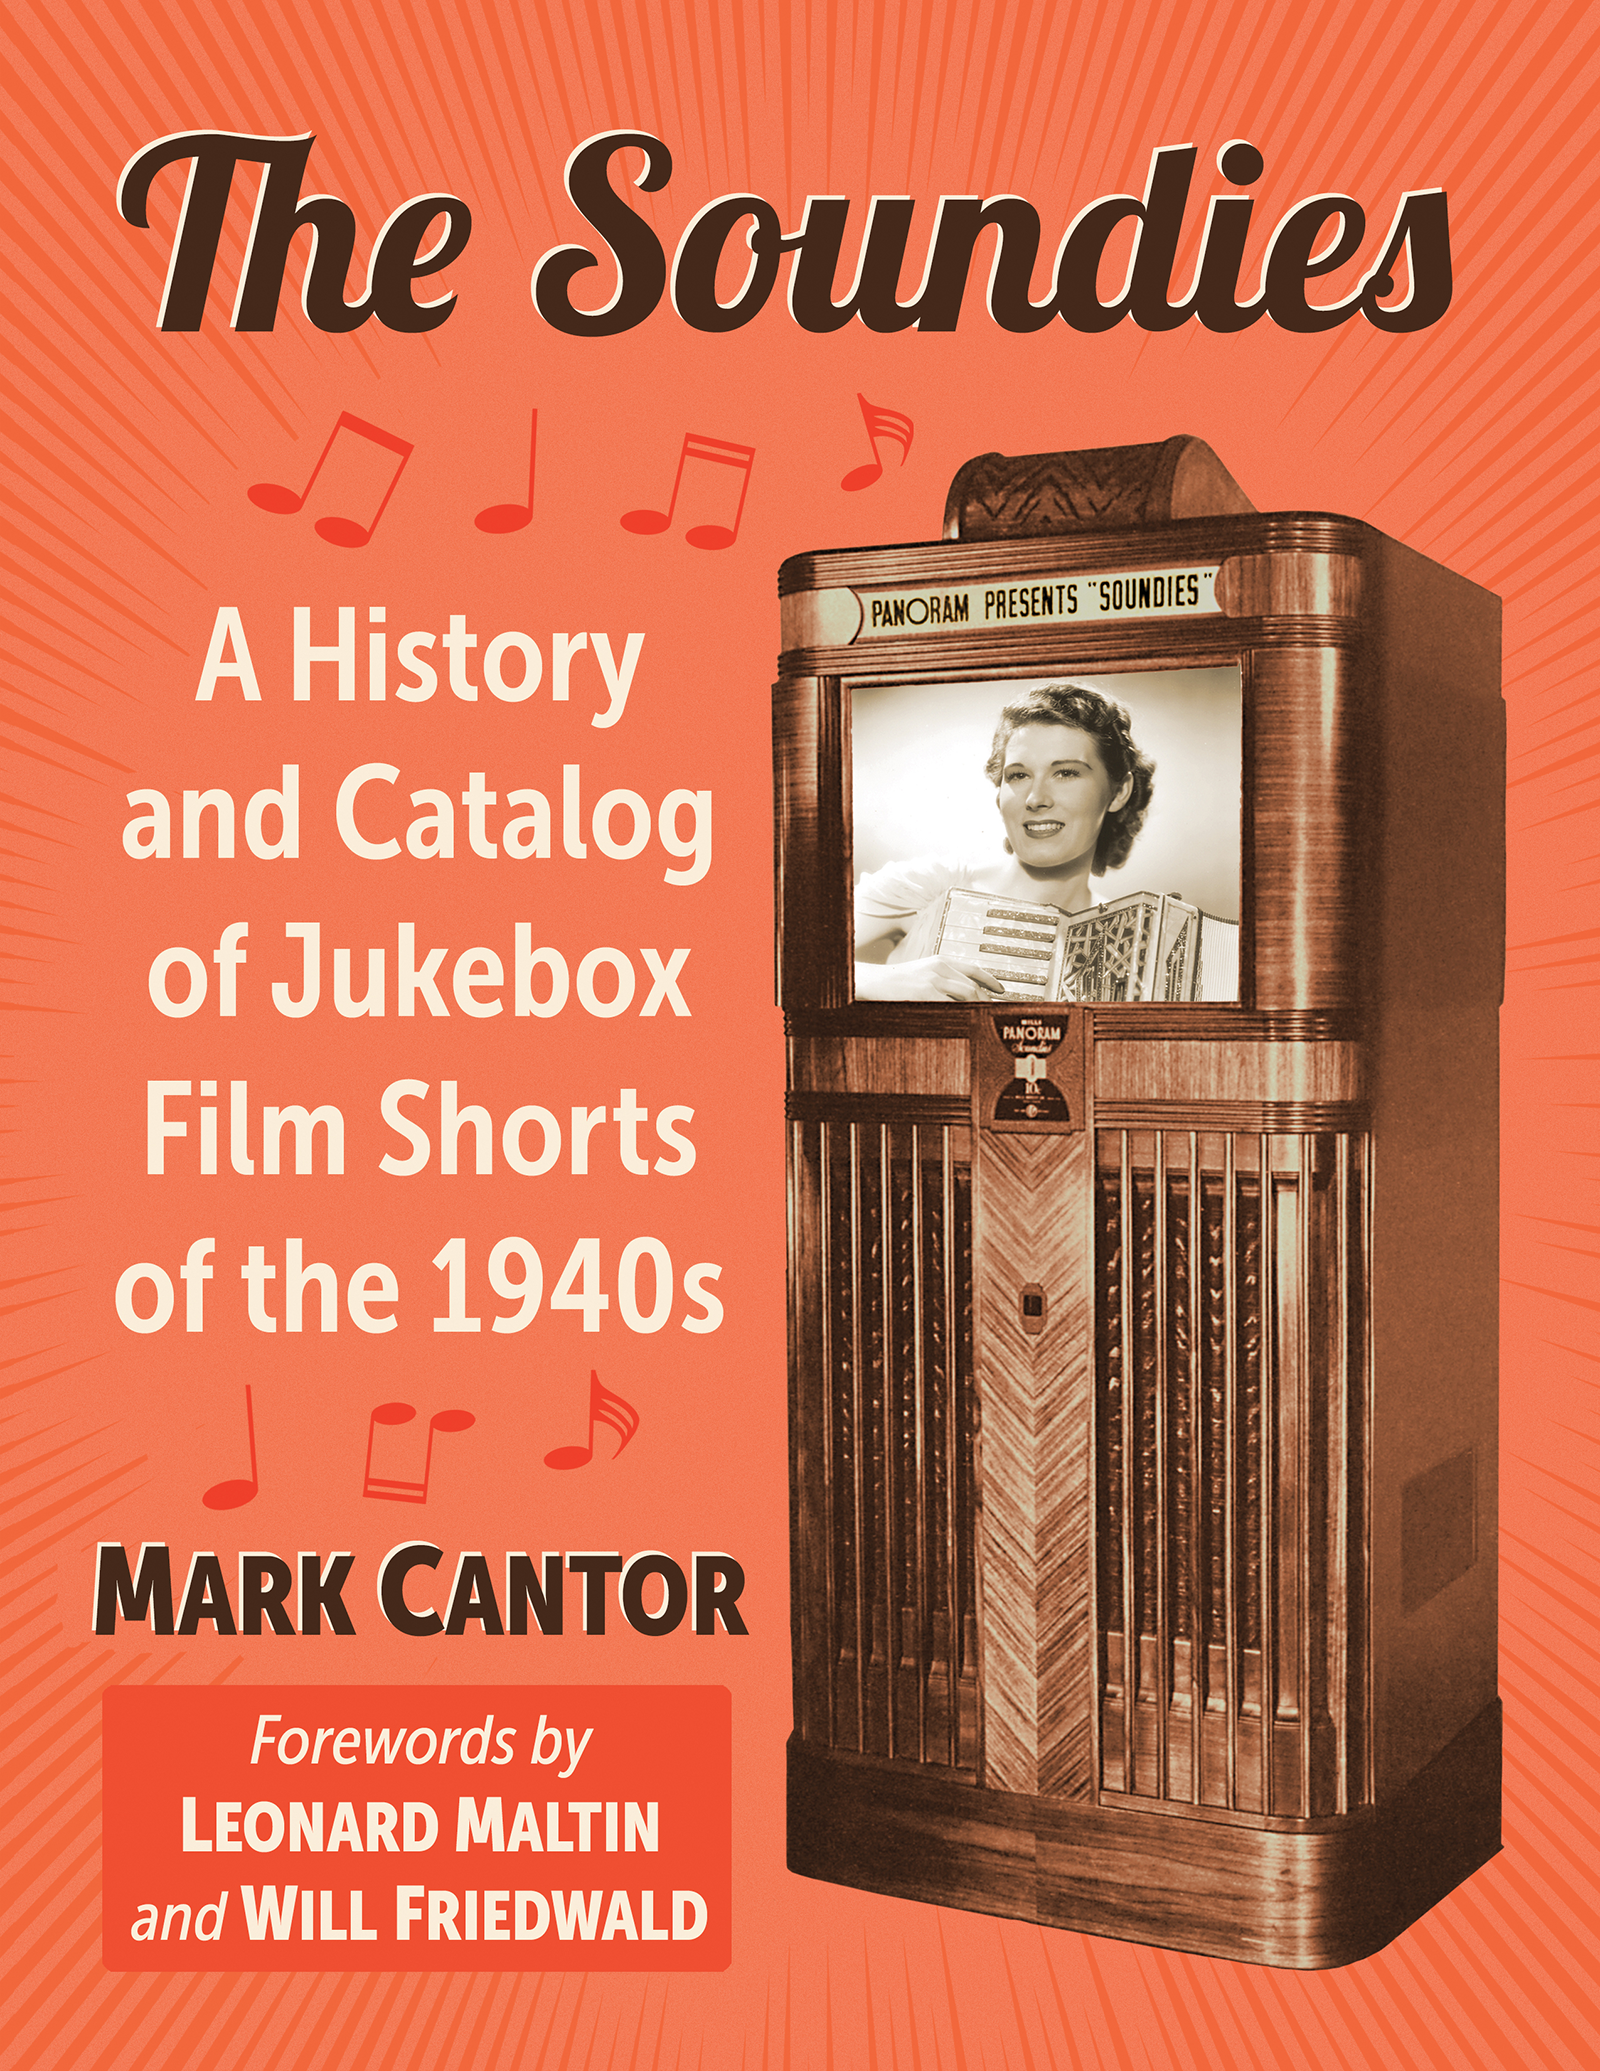 A History and Catalog of Jukebox Film Shorts of the 1940s Mark Cantor